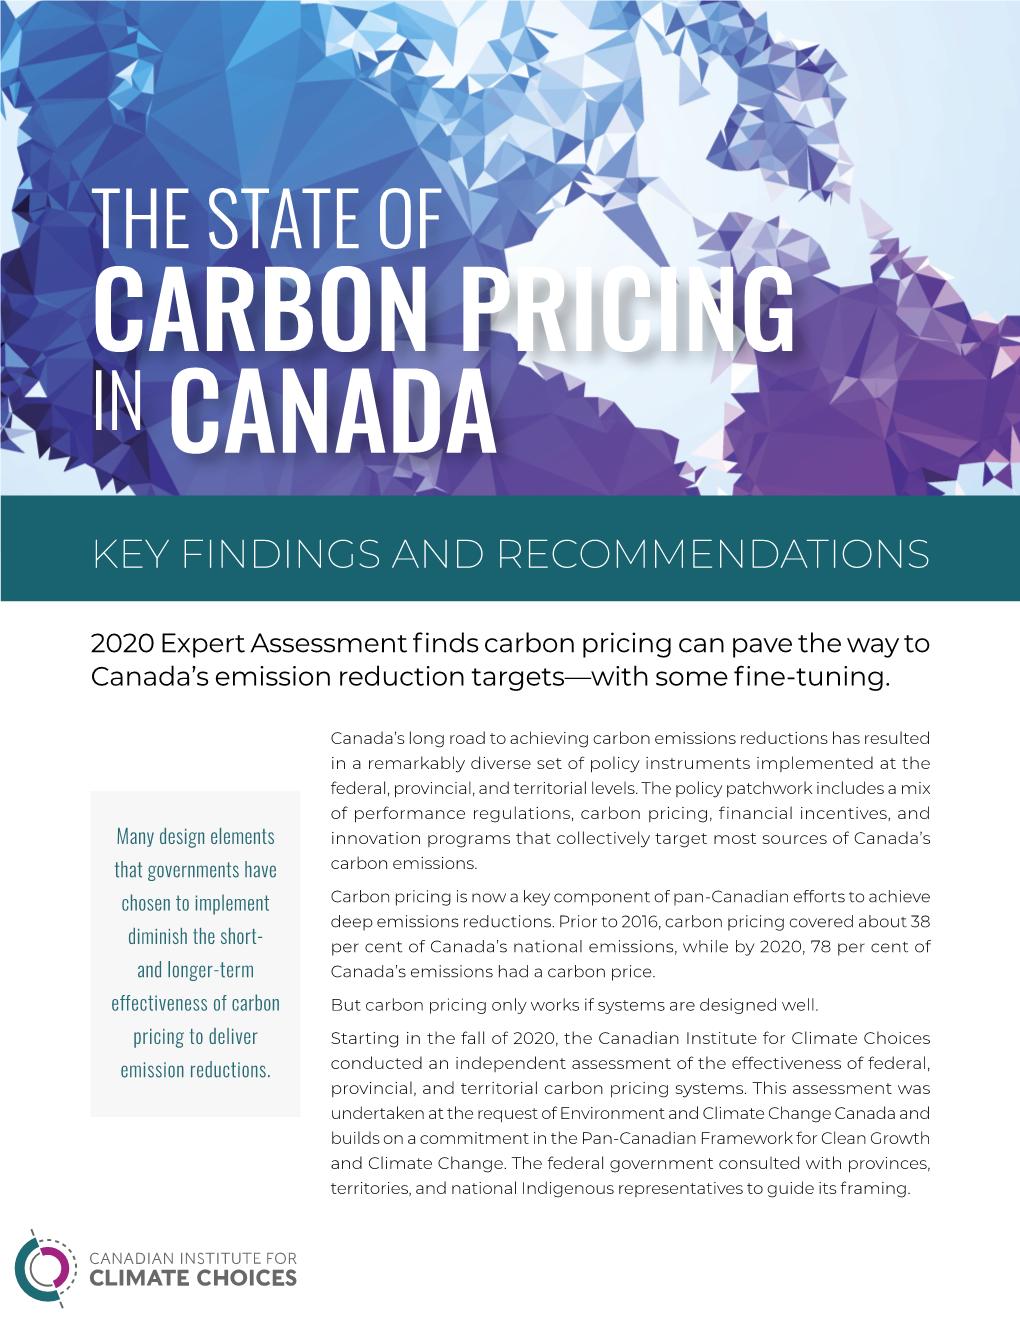 The State of Carbon Pricing in Canada